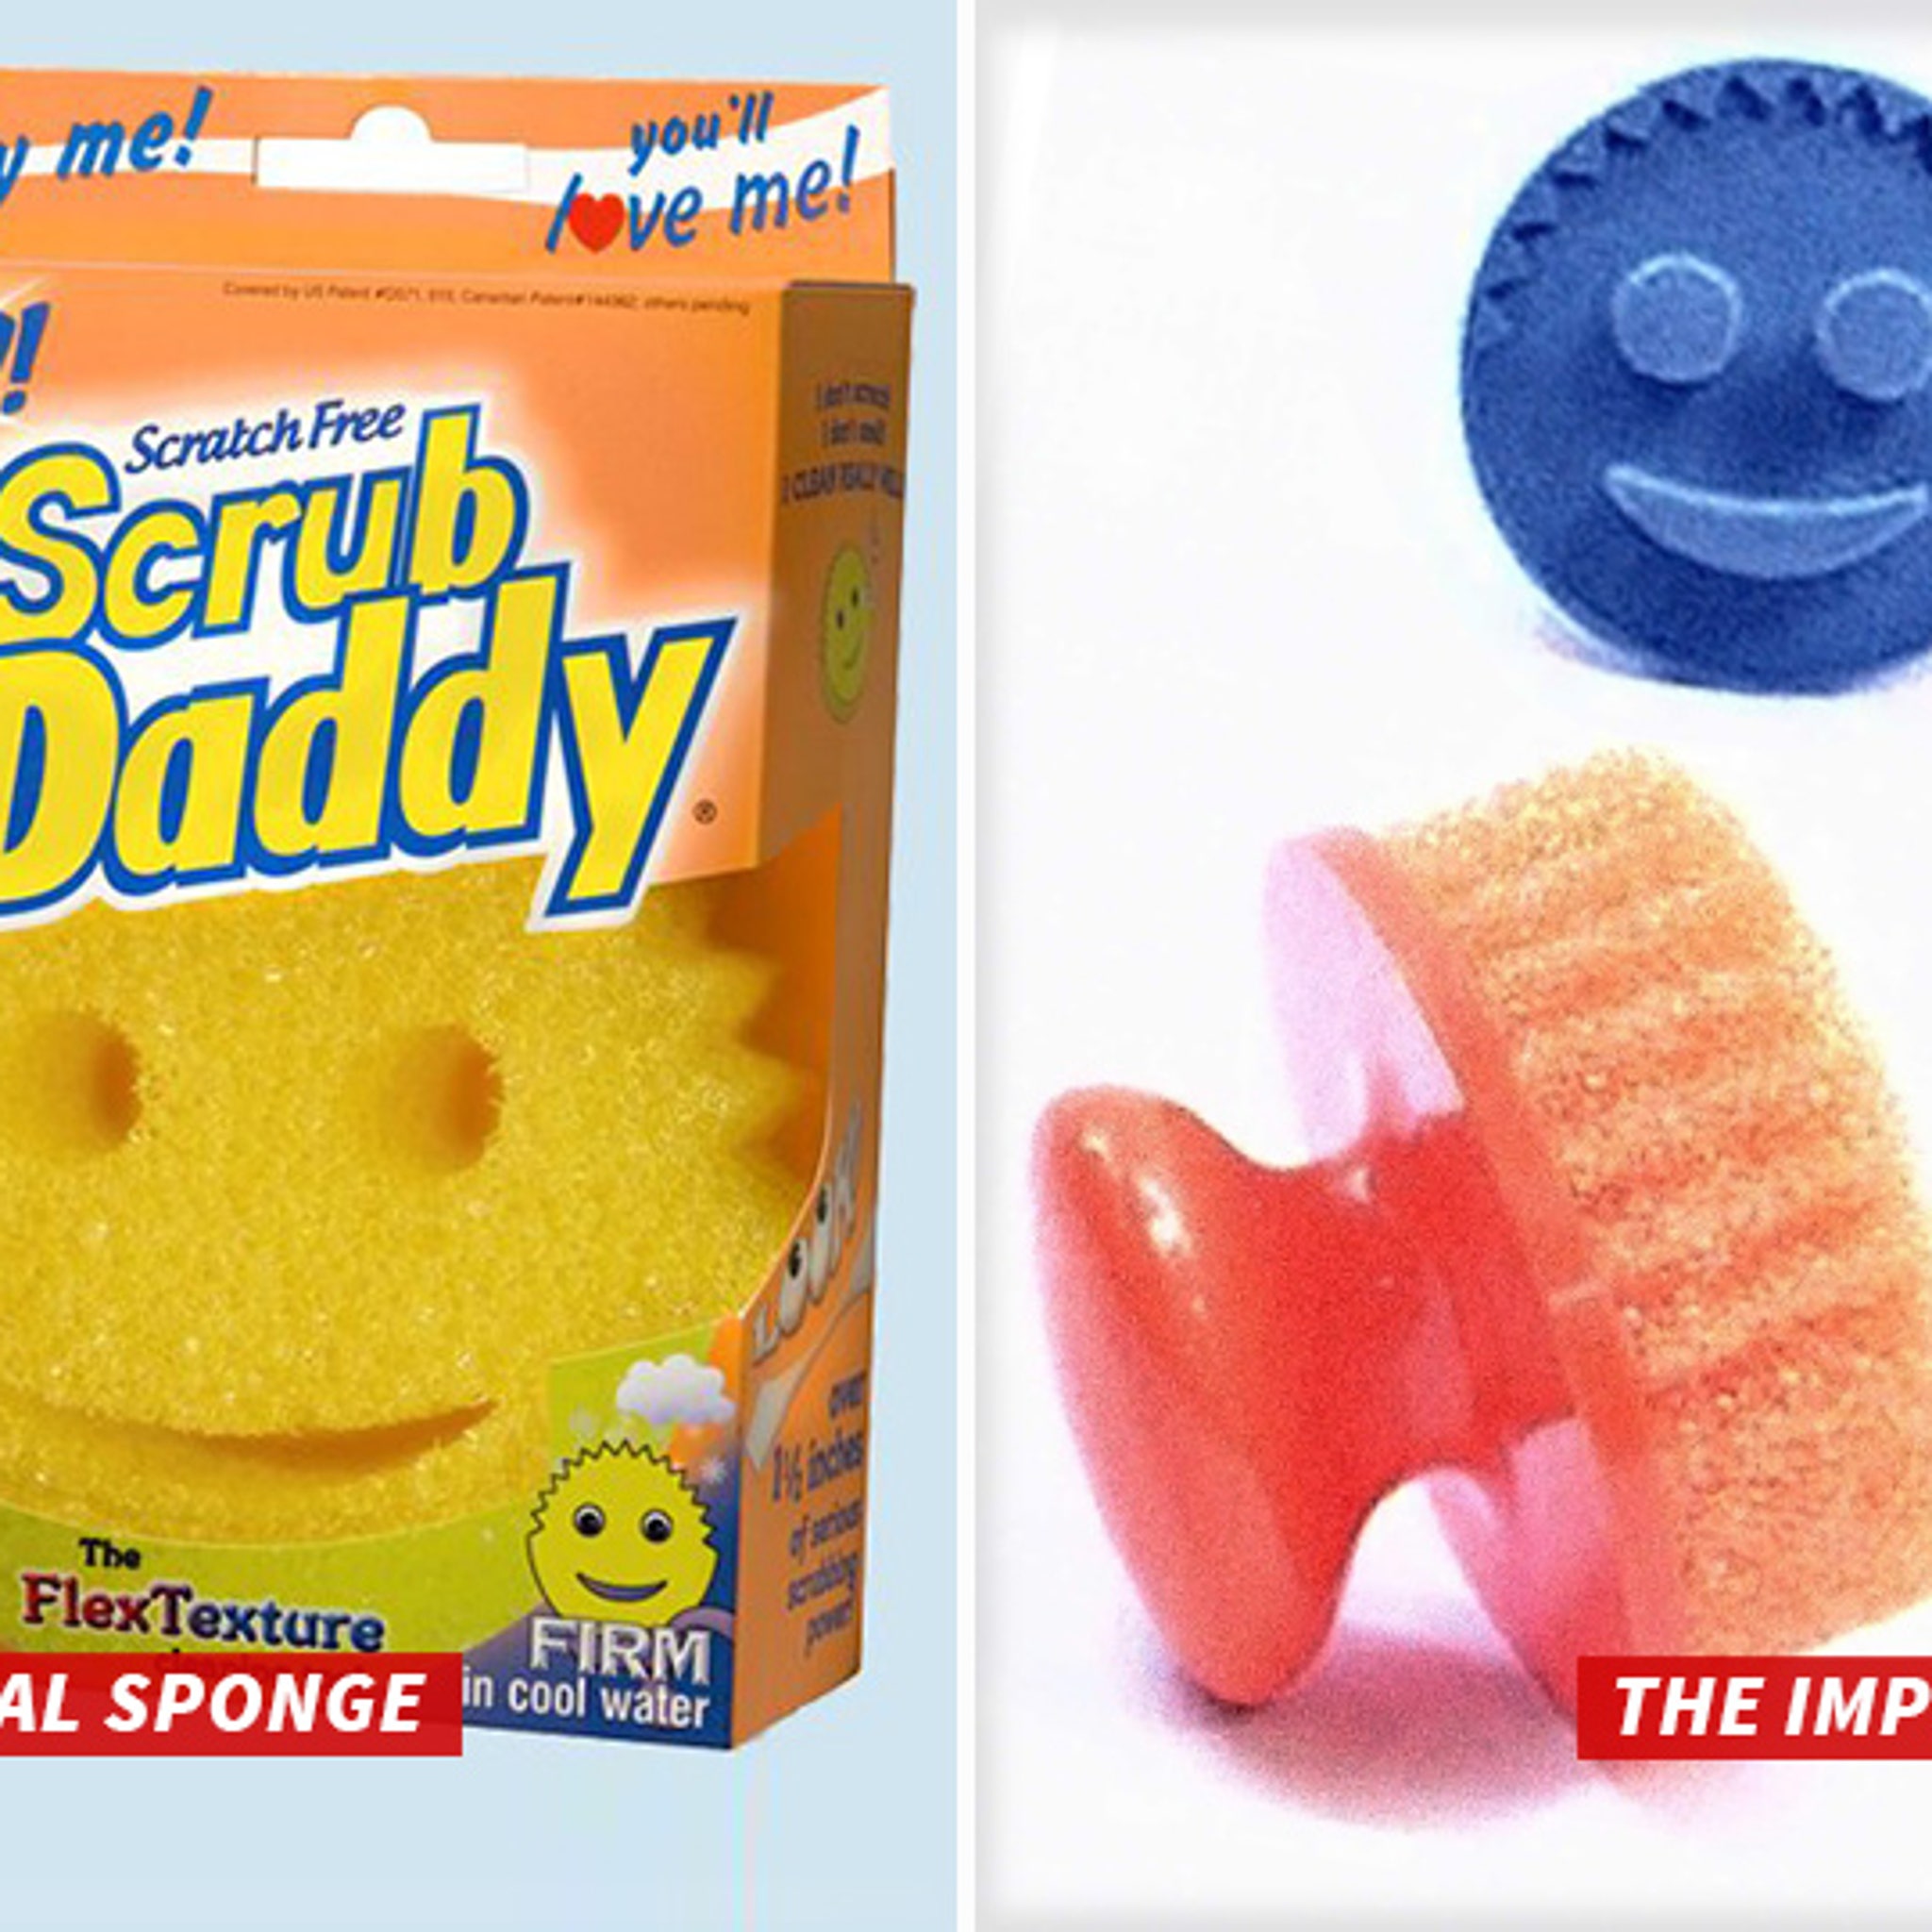 The definition of “the more you know” 🌈. #scrubdaddy #smile #cleantok, Scrub  Daddy's Shark Tank